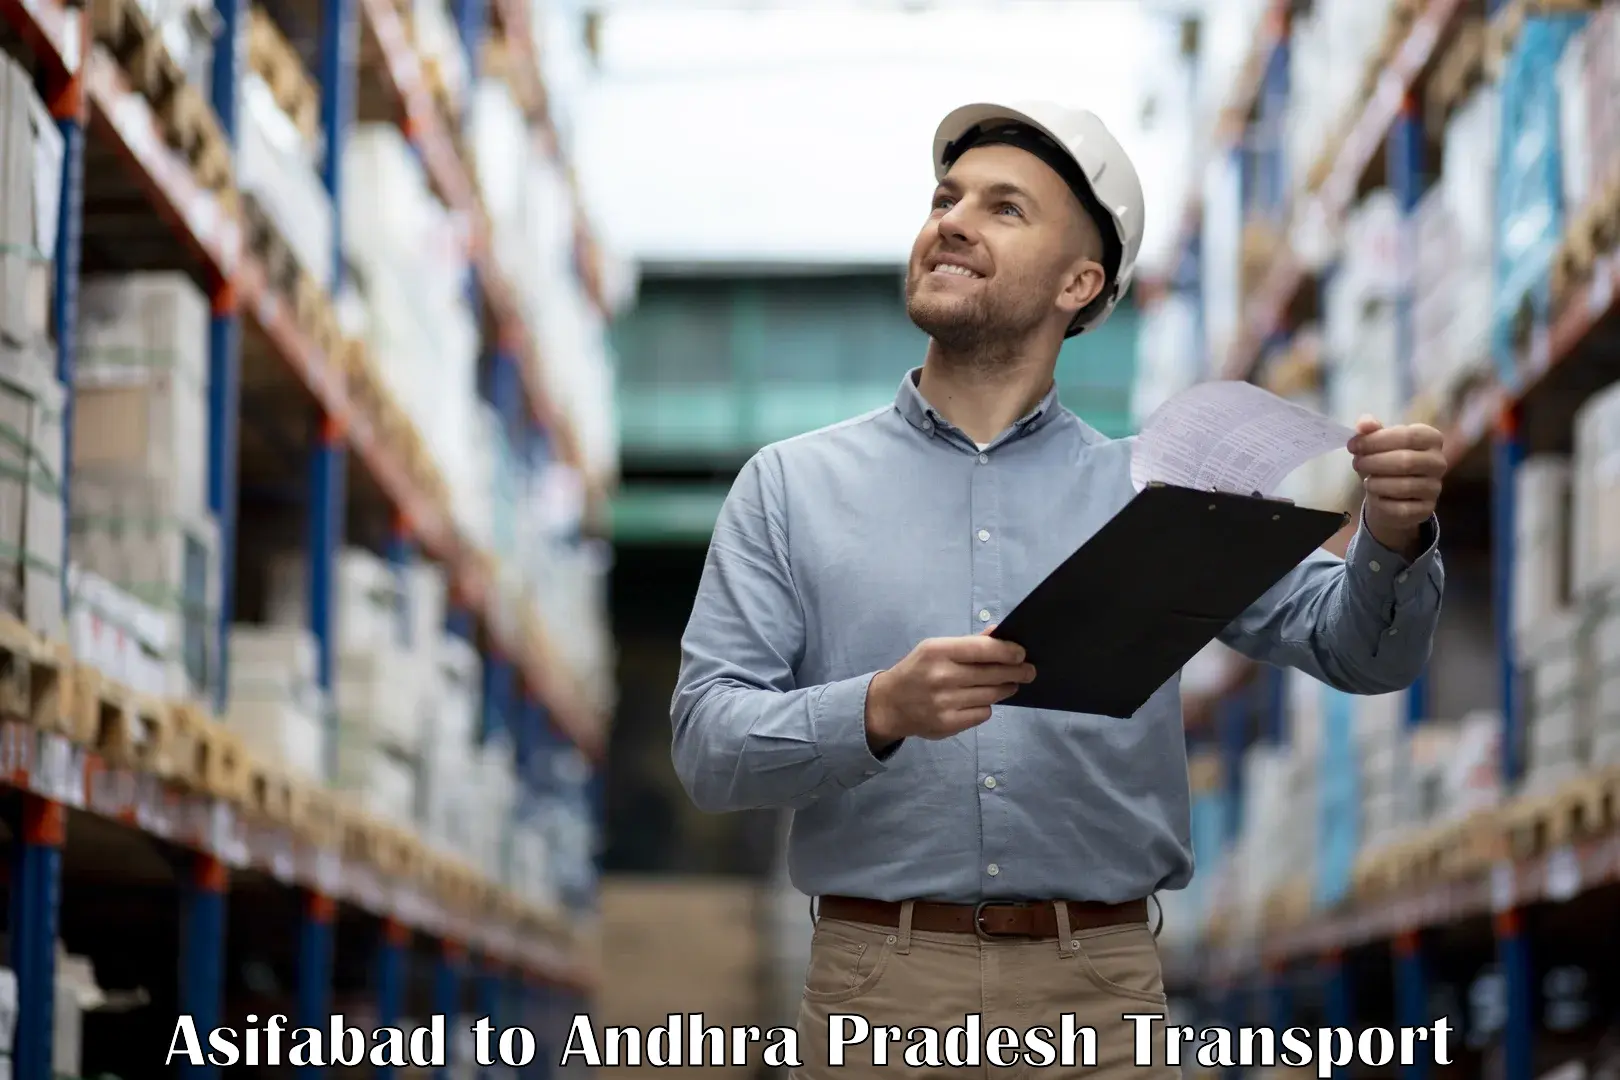 Express transport services in Asifabad to Tirupati